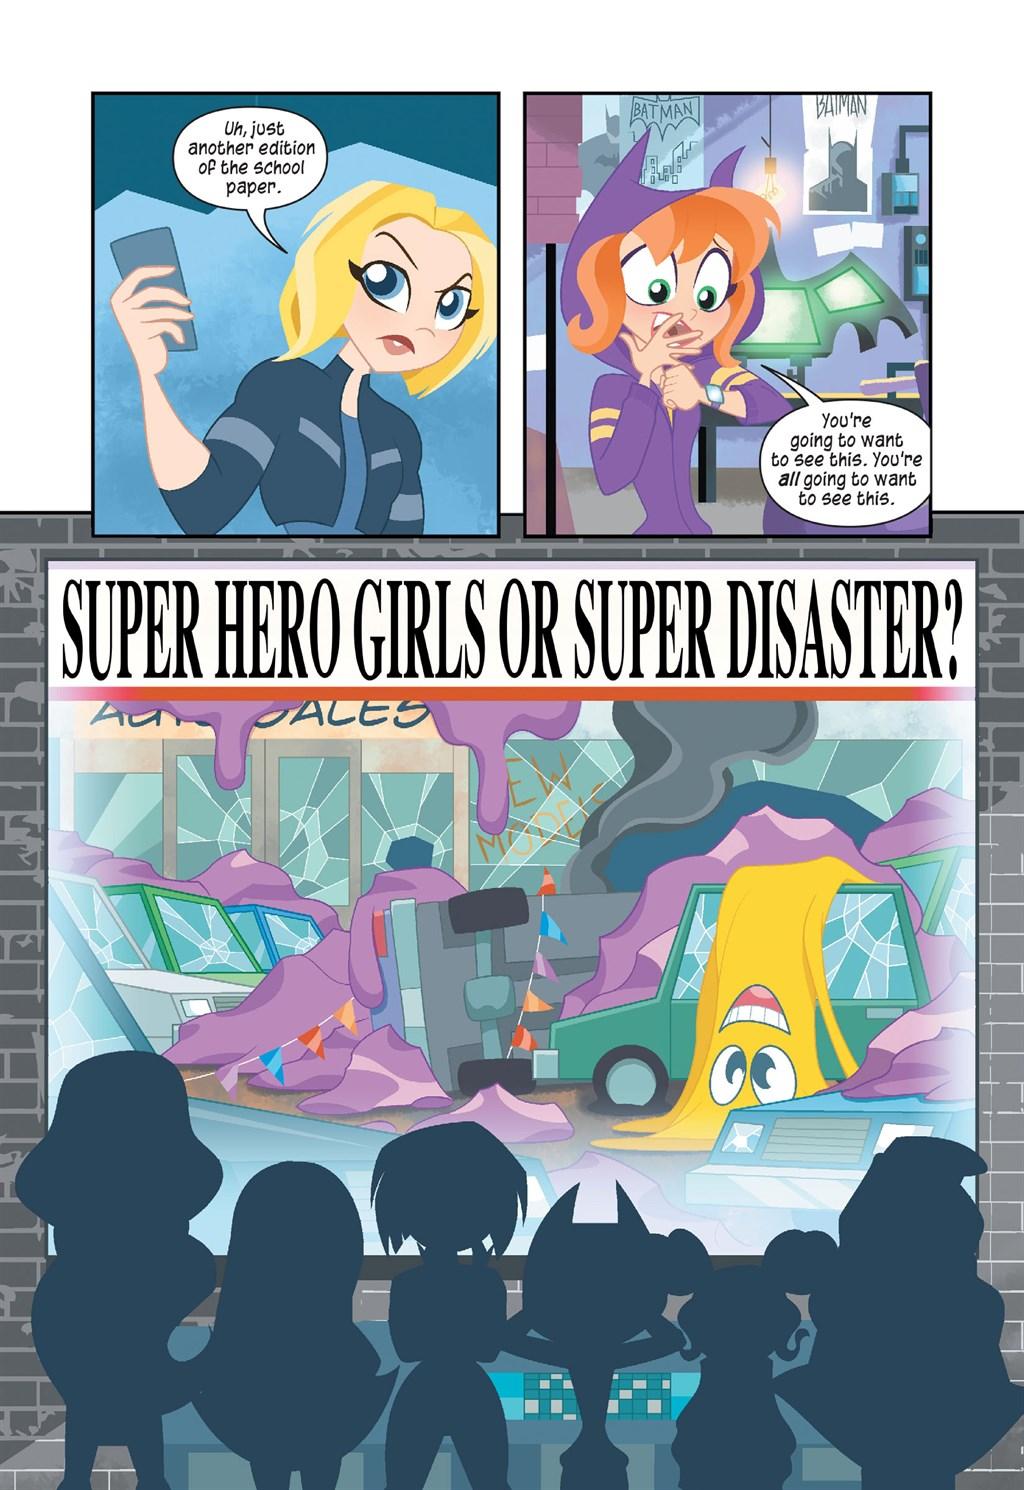 DC Super Hero Girls Midterms review